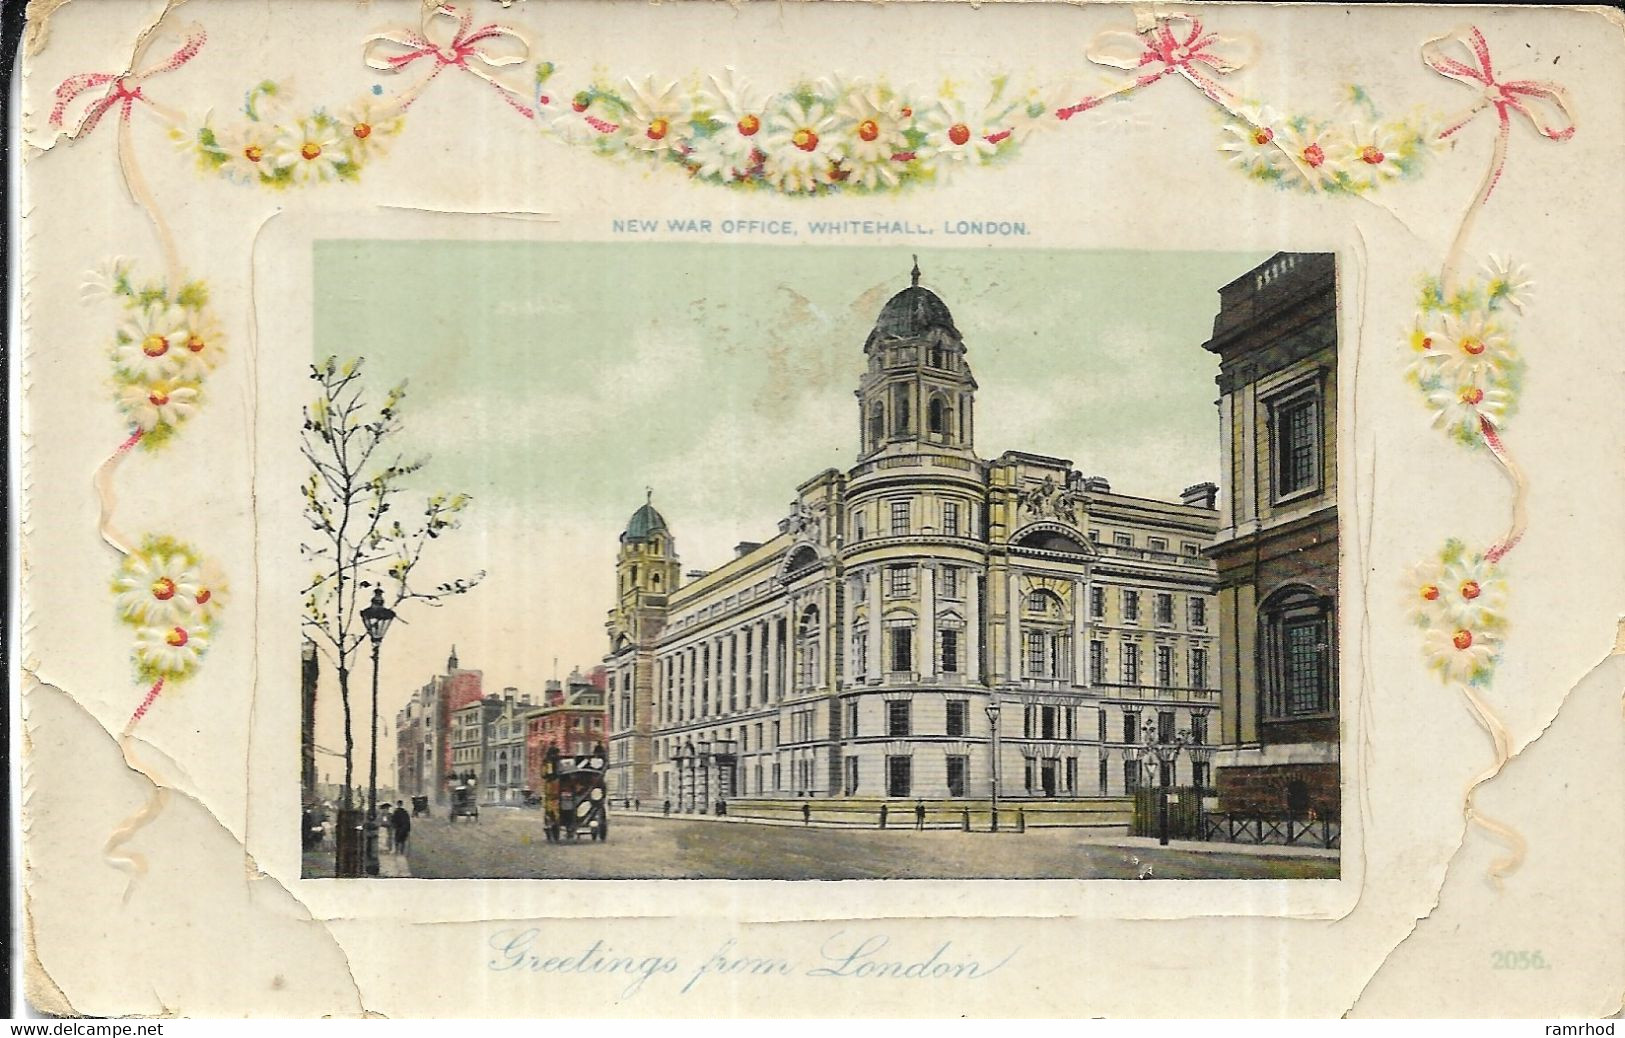 LONDON, Whitehall, New War Office (Publisher - Celoidchrom Series, GD & DL) Date - Early 1900's, Used - Whitehall